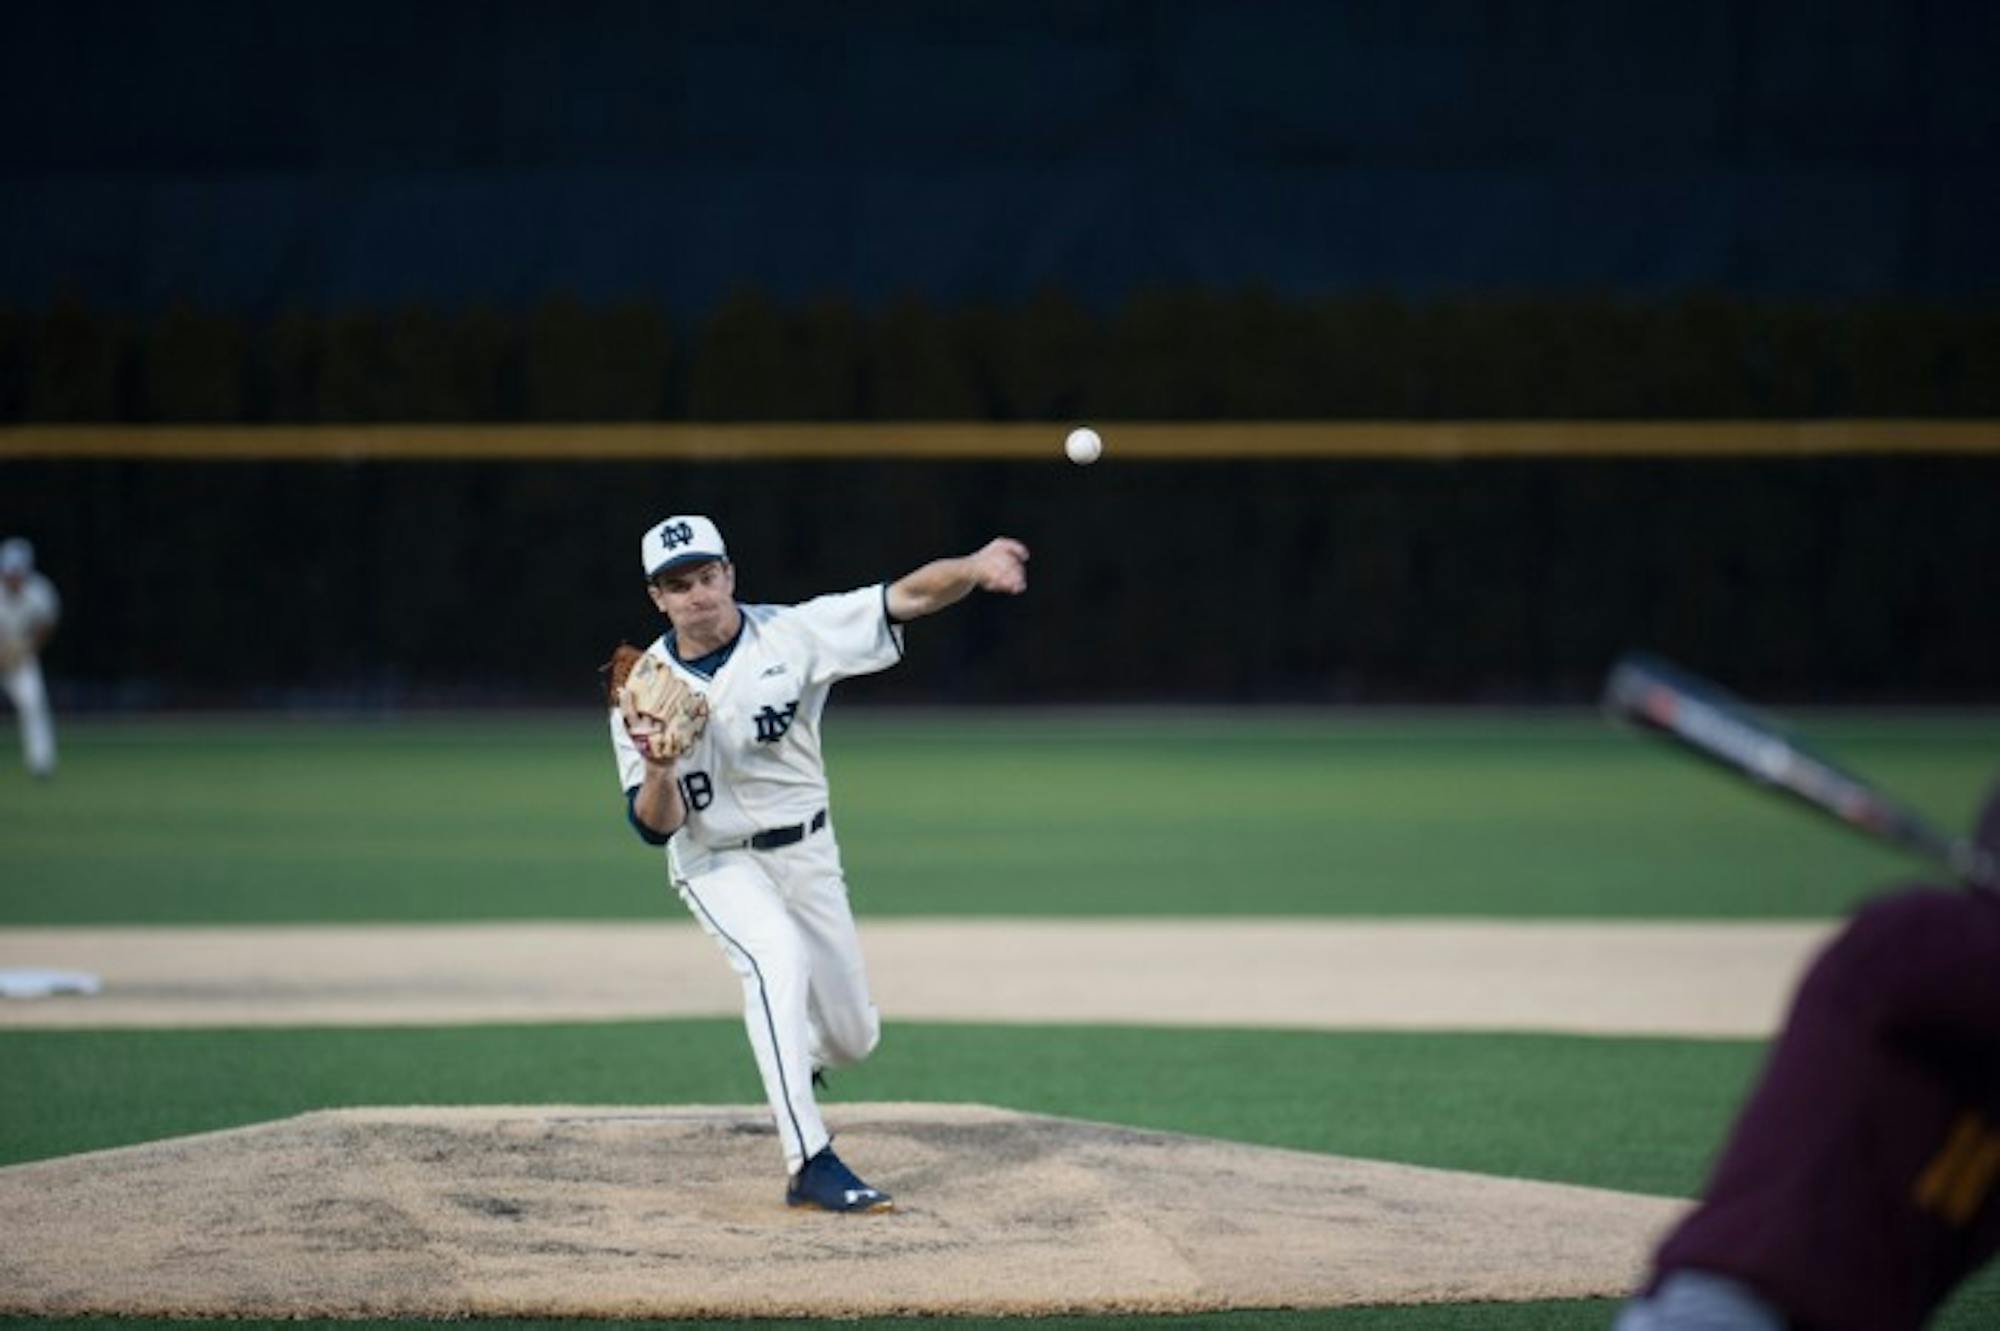 Irish sophomore pitcher Scott Tully delivers a pitch during Notre Dame’s 8-3 win over Central Michigan on March 18. Tully pitched 6 1/3 innings in Notre Dame’s 6-5 loss to Indiana yesterday.